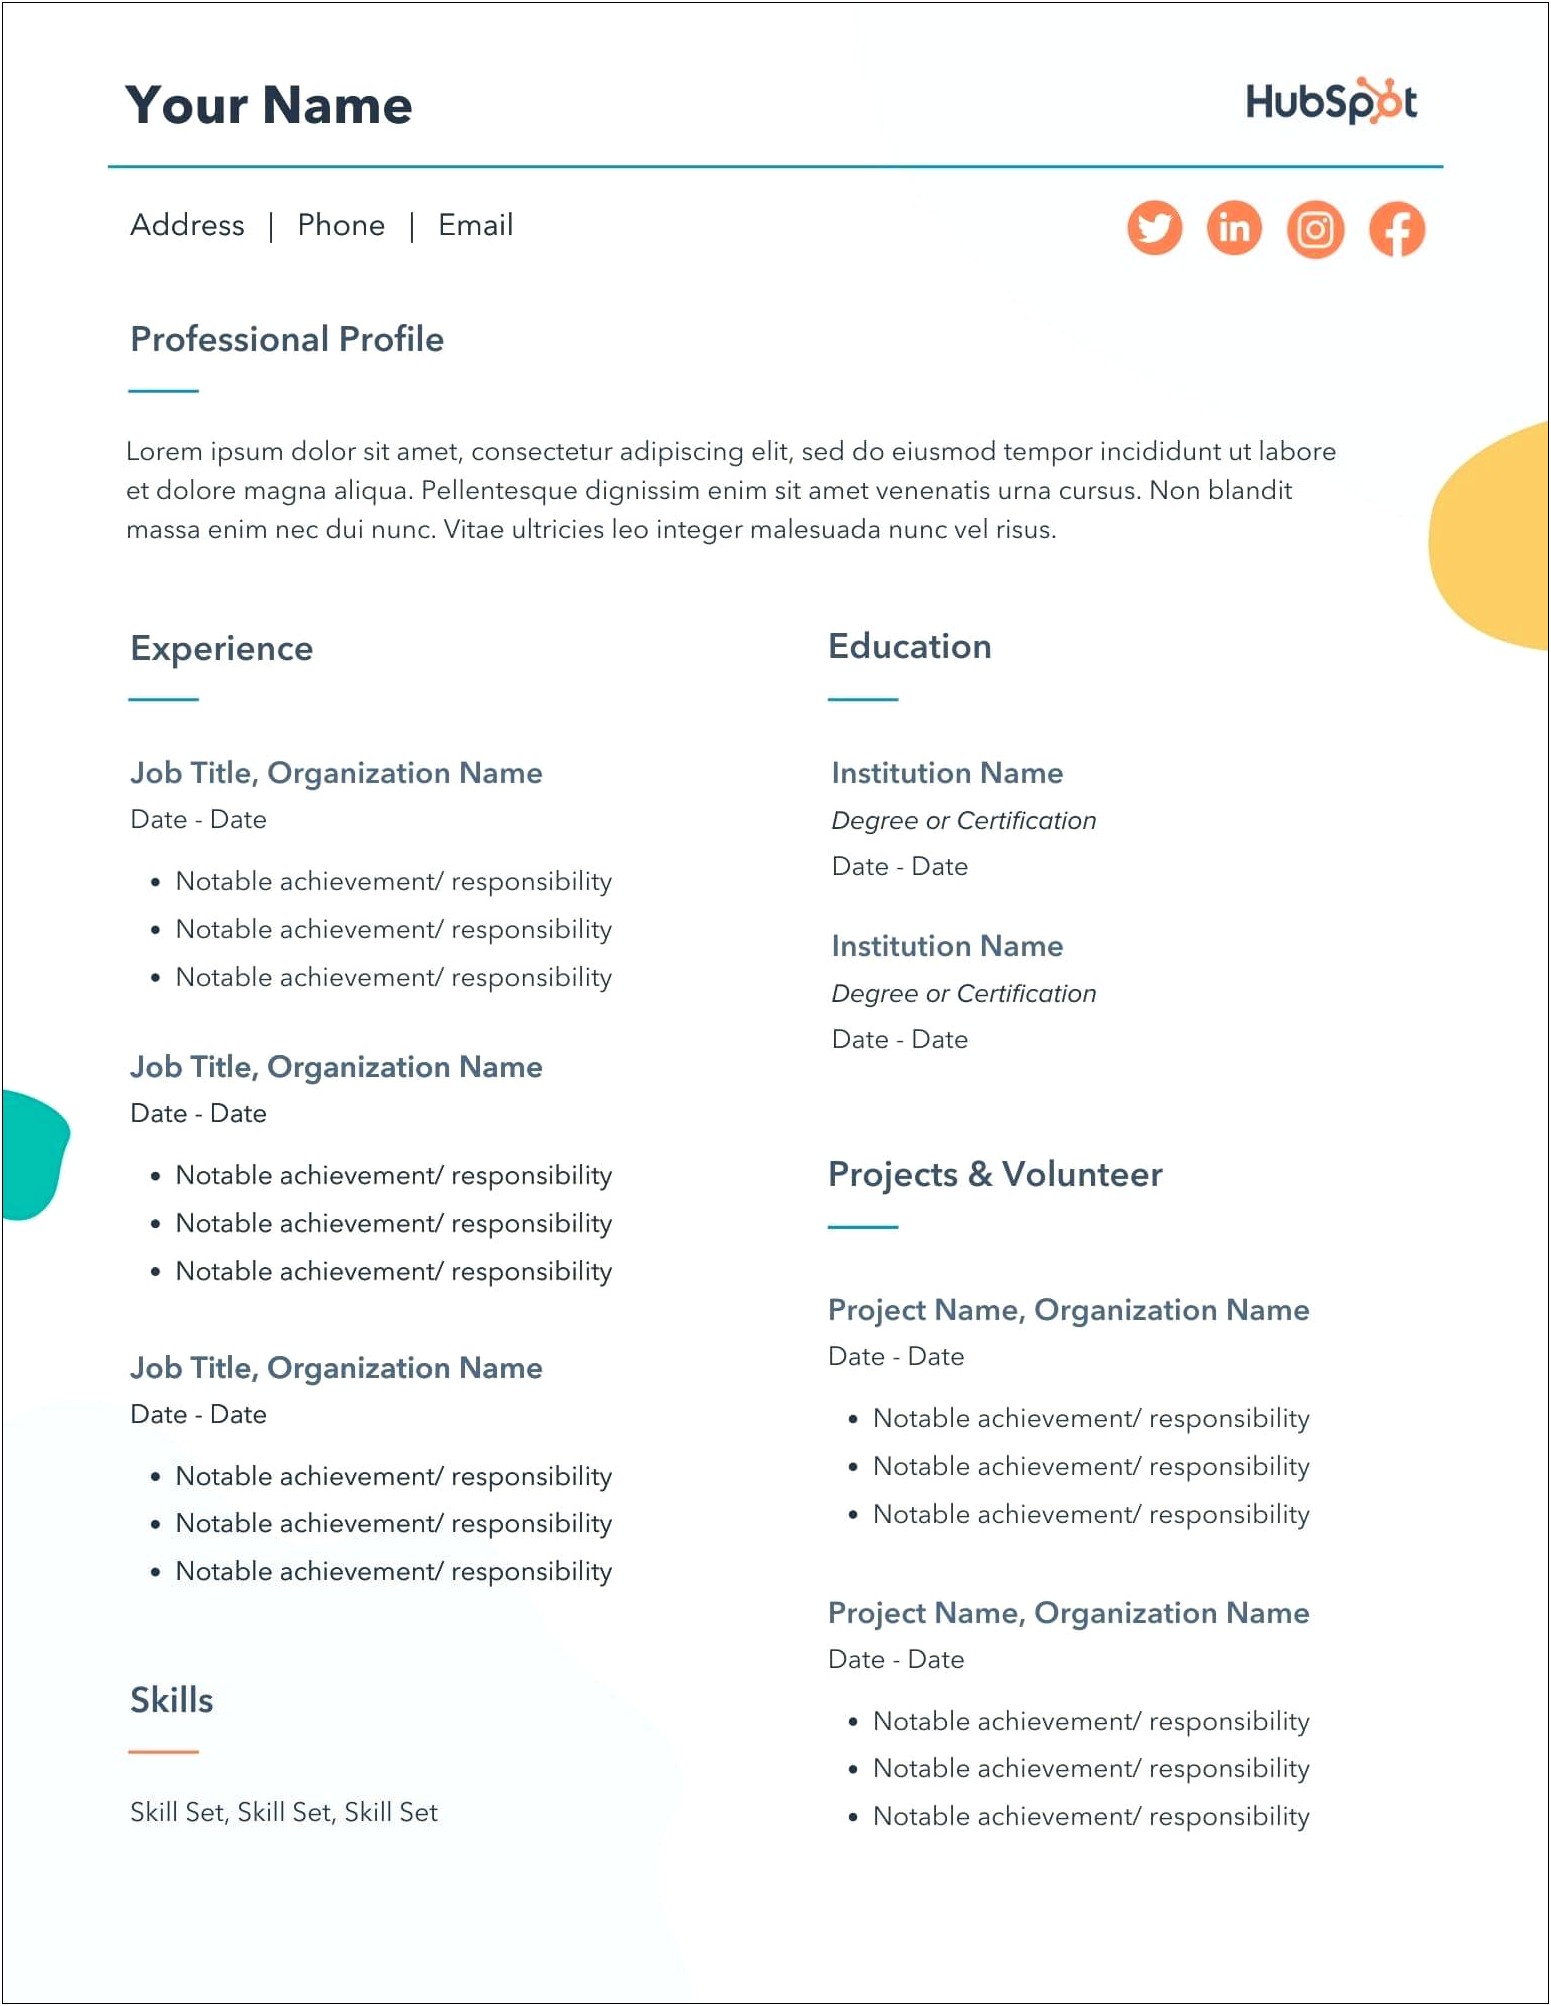 Multiple Jobs At One Company Resume